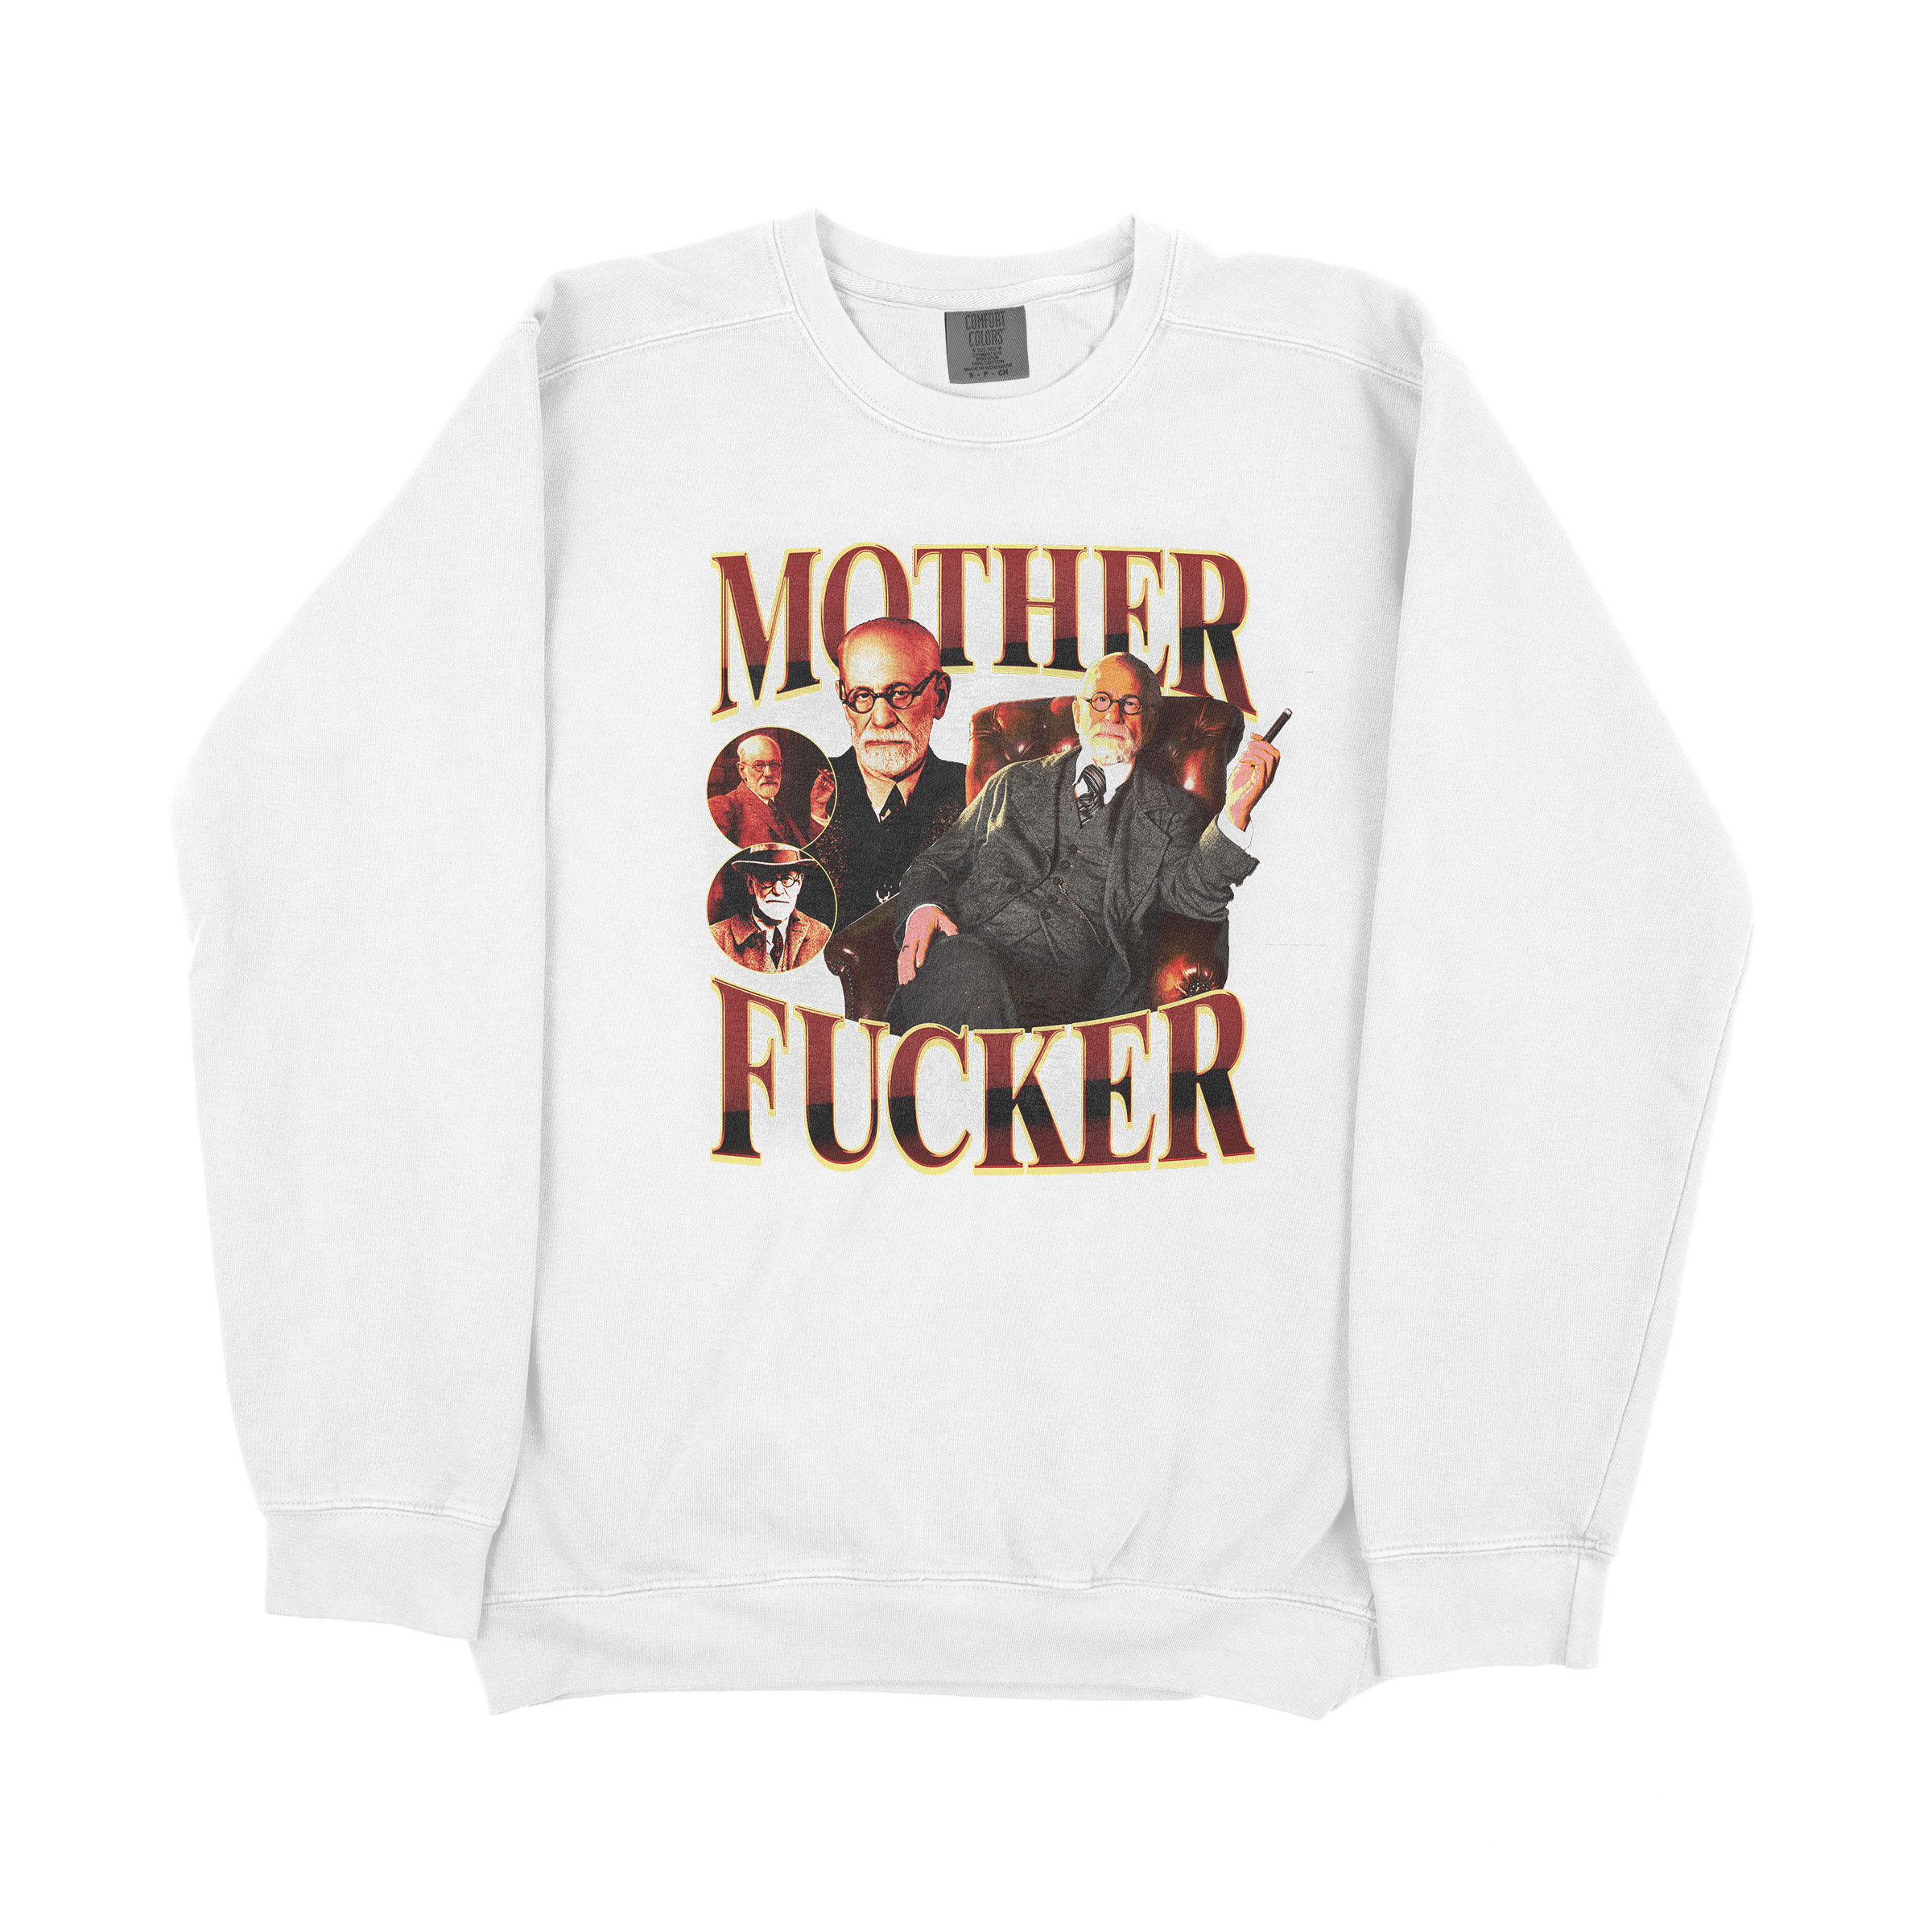 Motherf*cker sweatshirt with bold and humorous graphic.